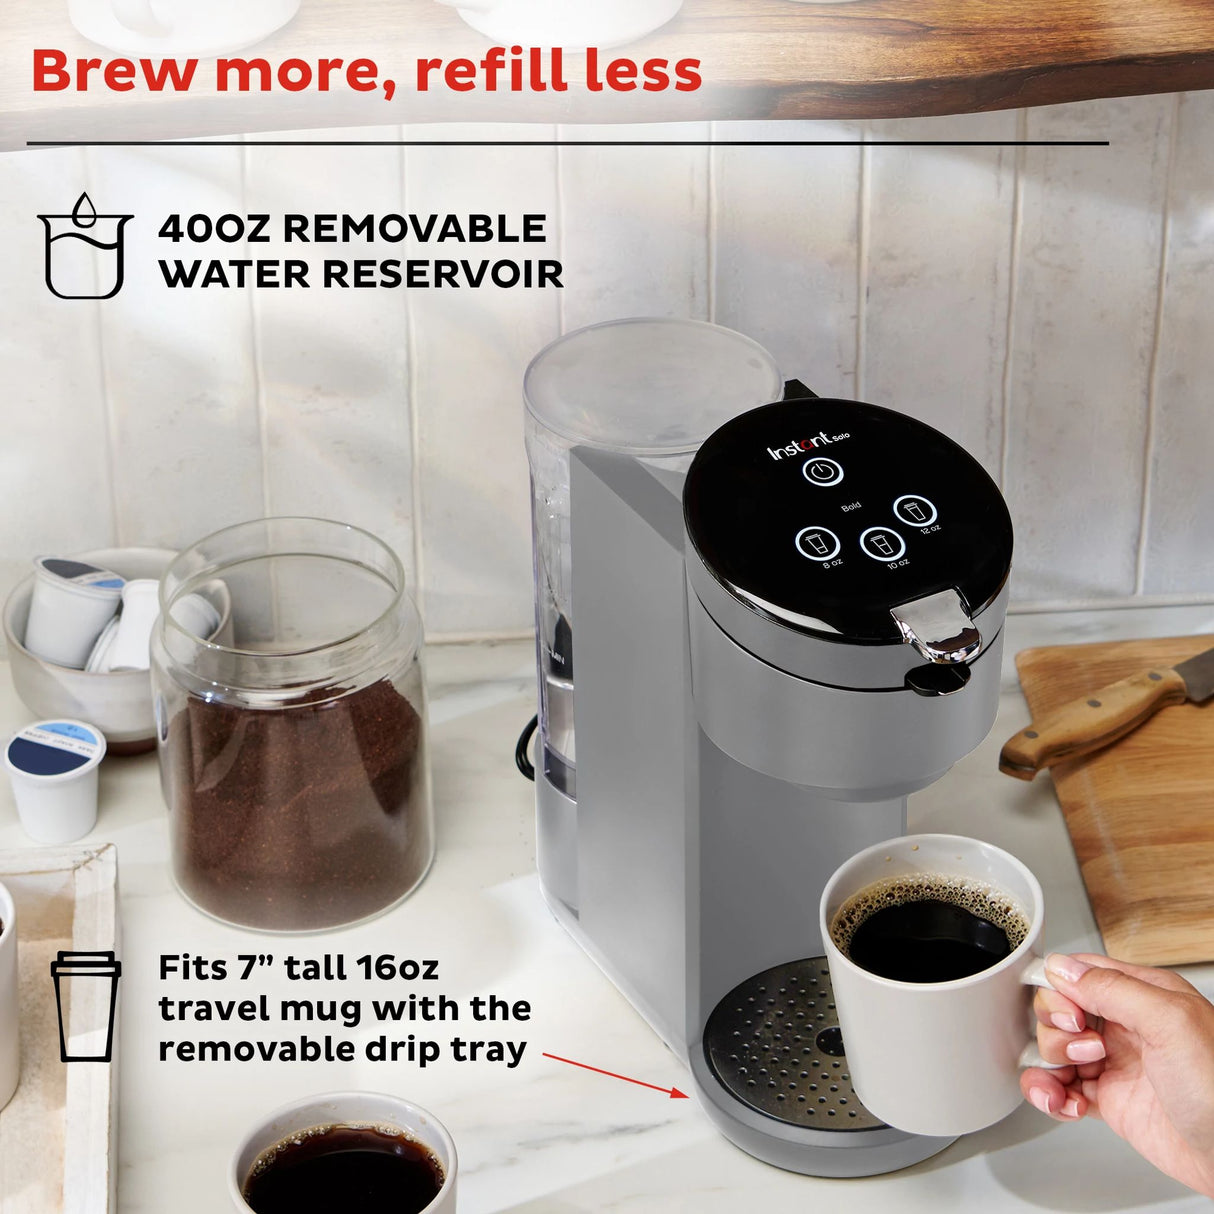  Instant Gray Solo Single Serve Coffee Maker with text brew more, refill less